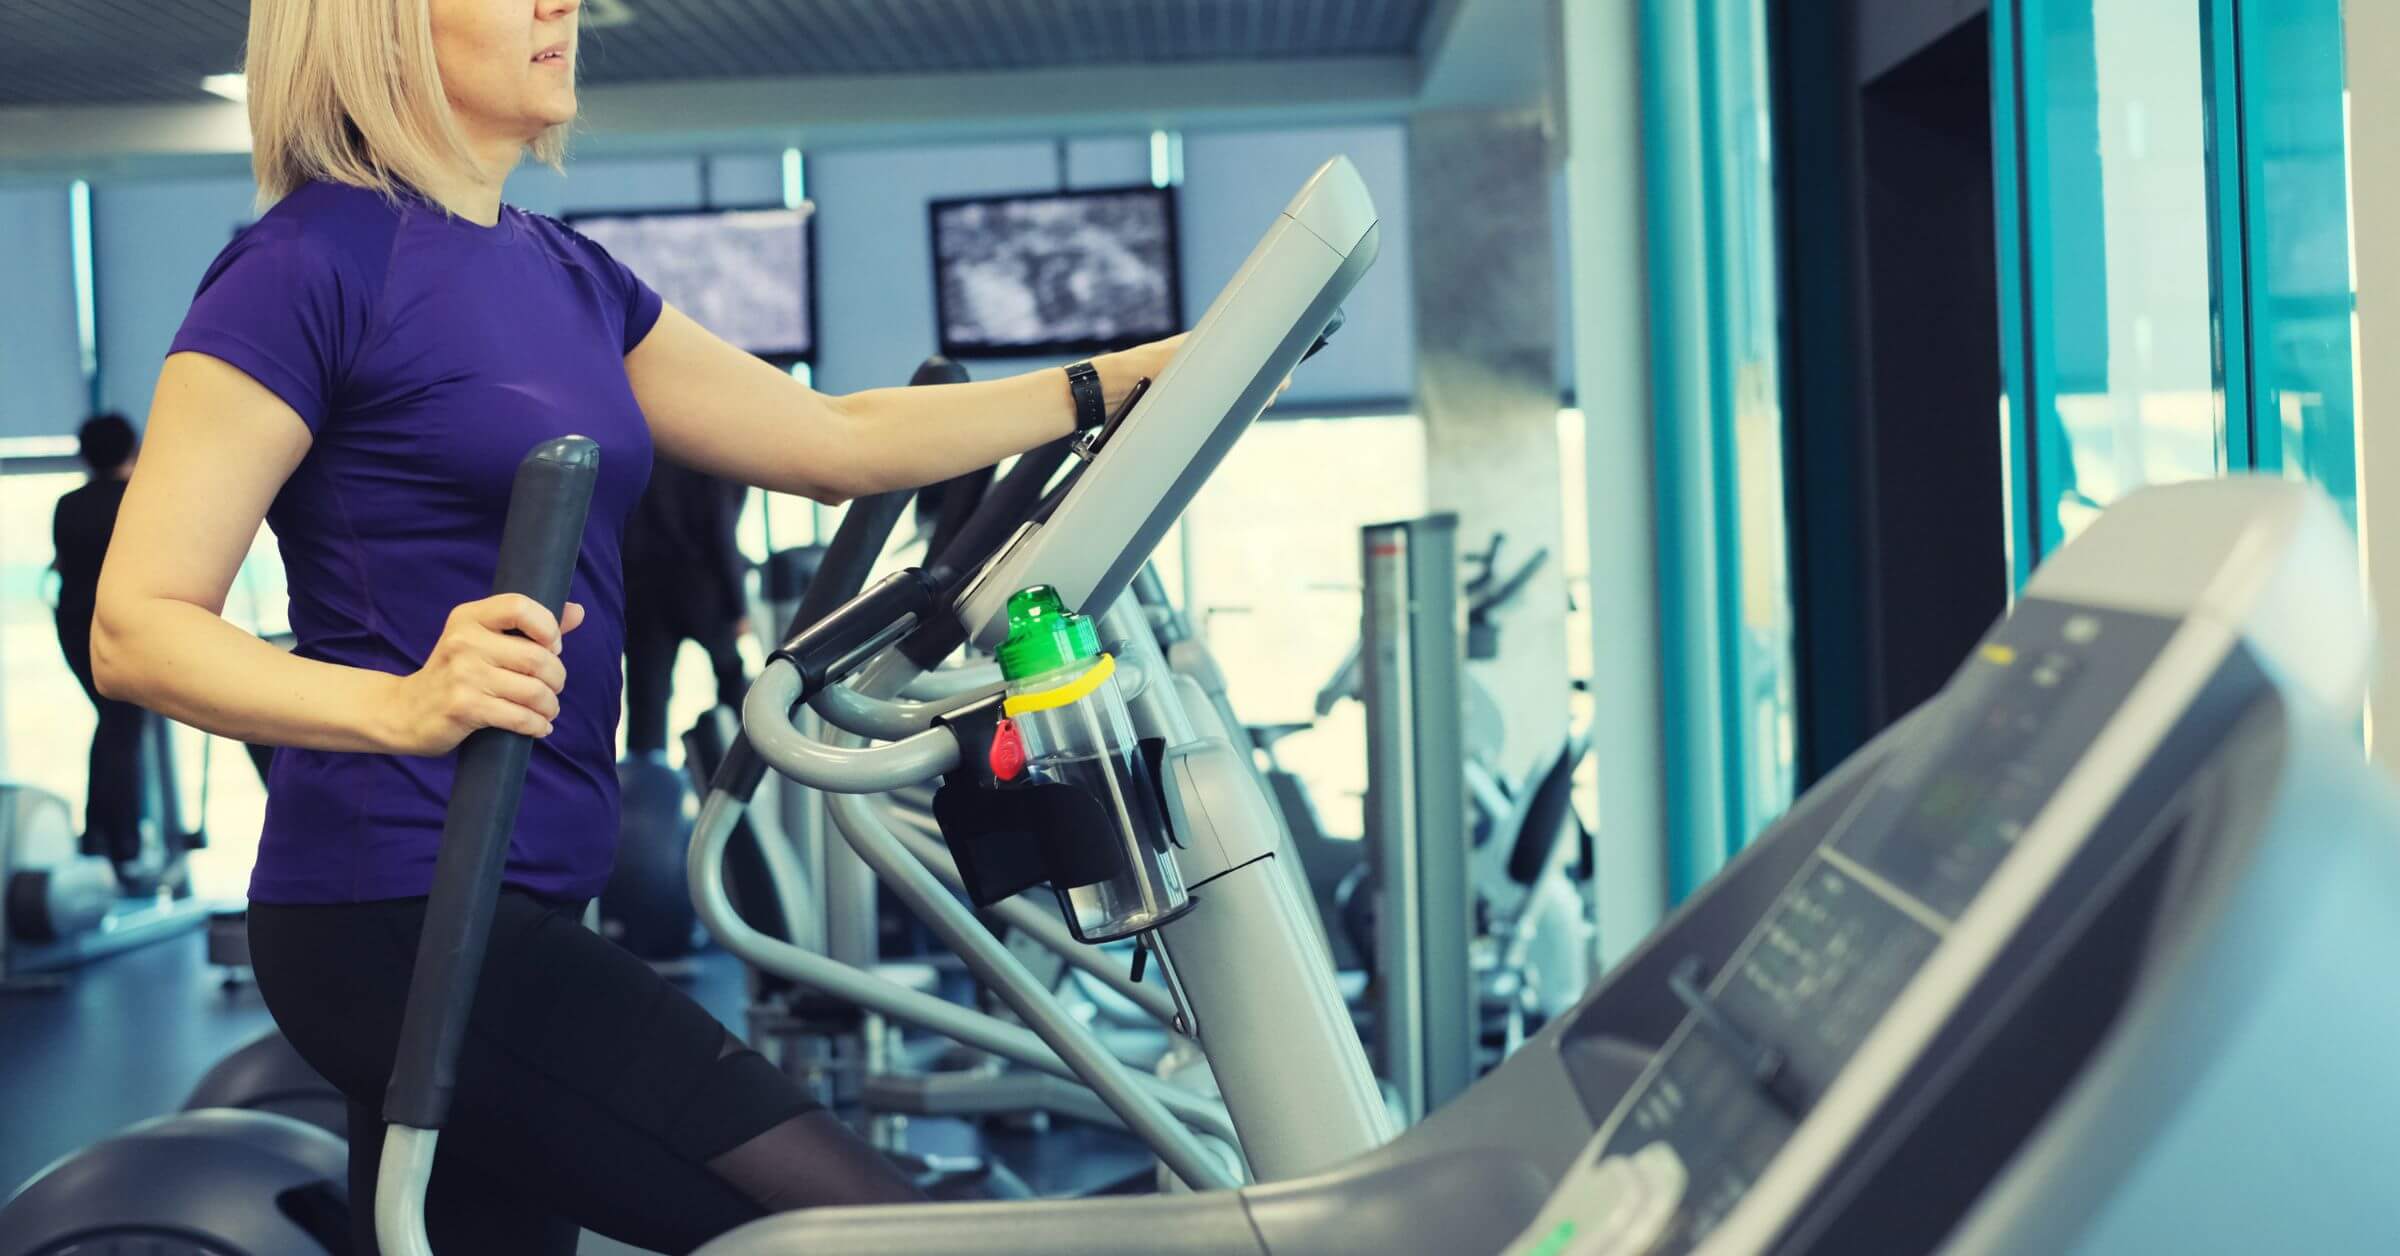 Exercising with these machines is very effective for burning calories.